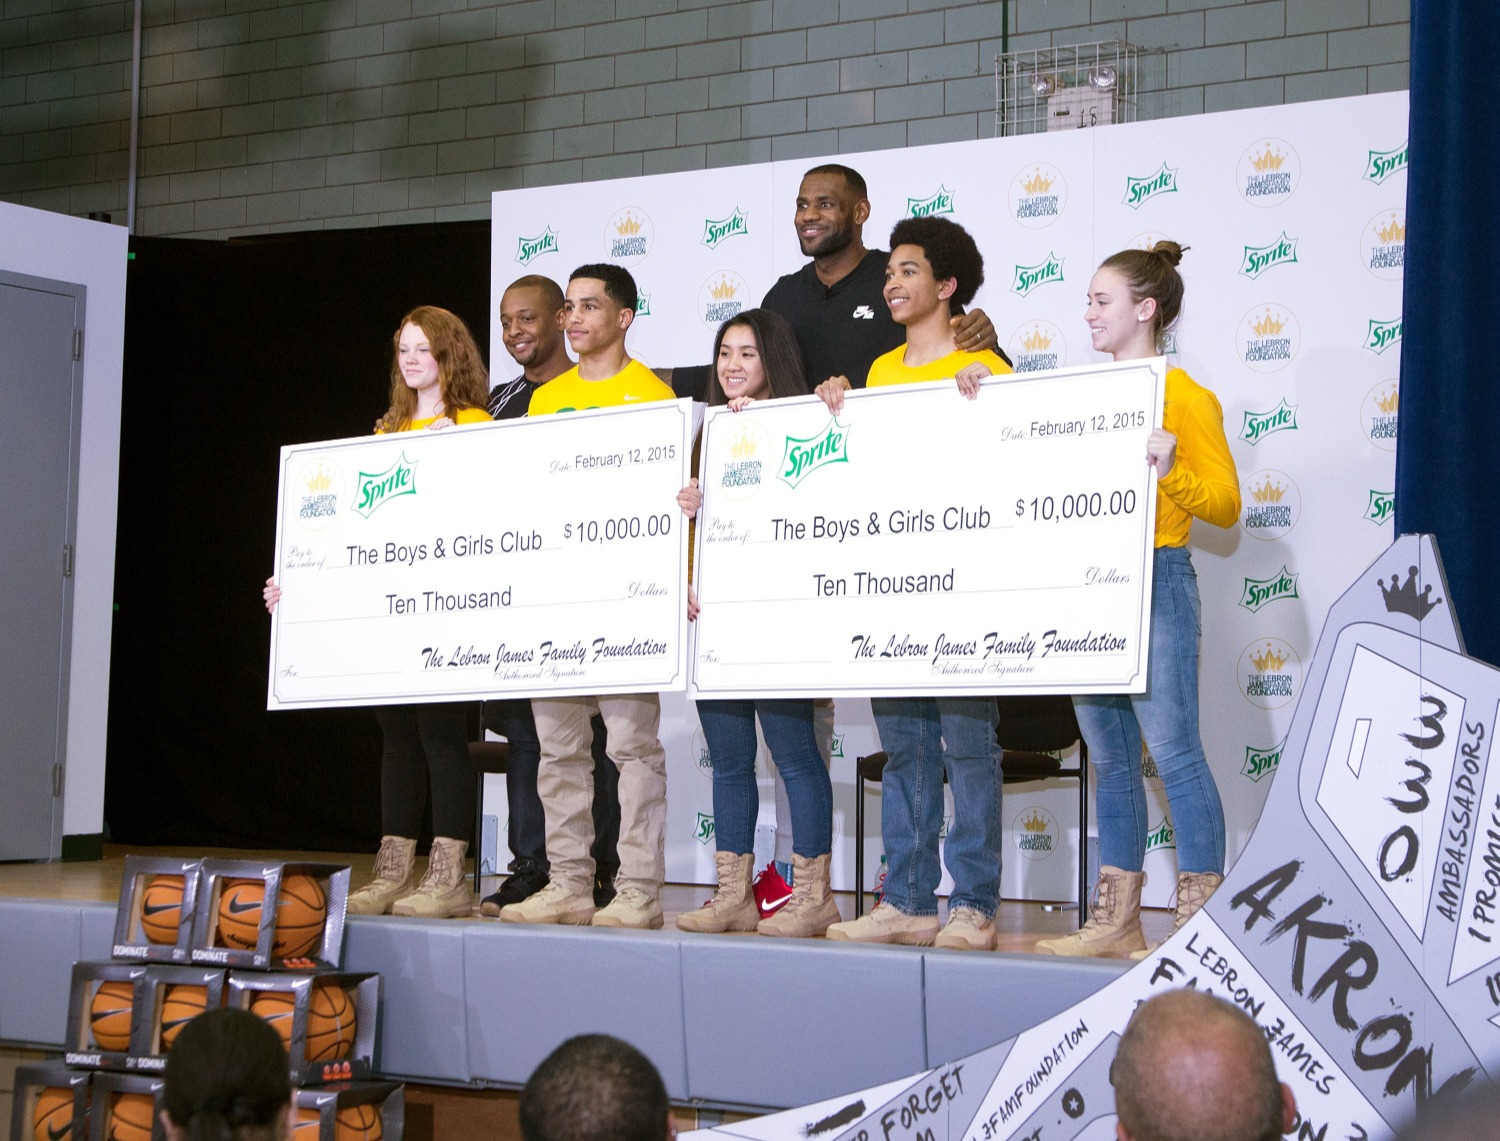 LeBron James turned The Decision into a $3 million donation.